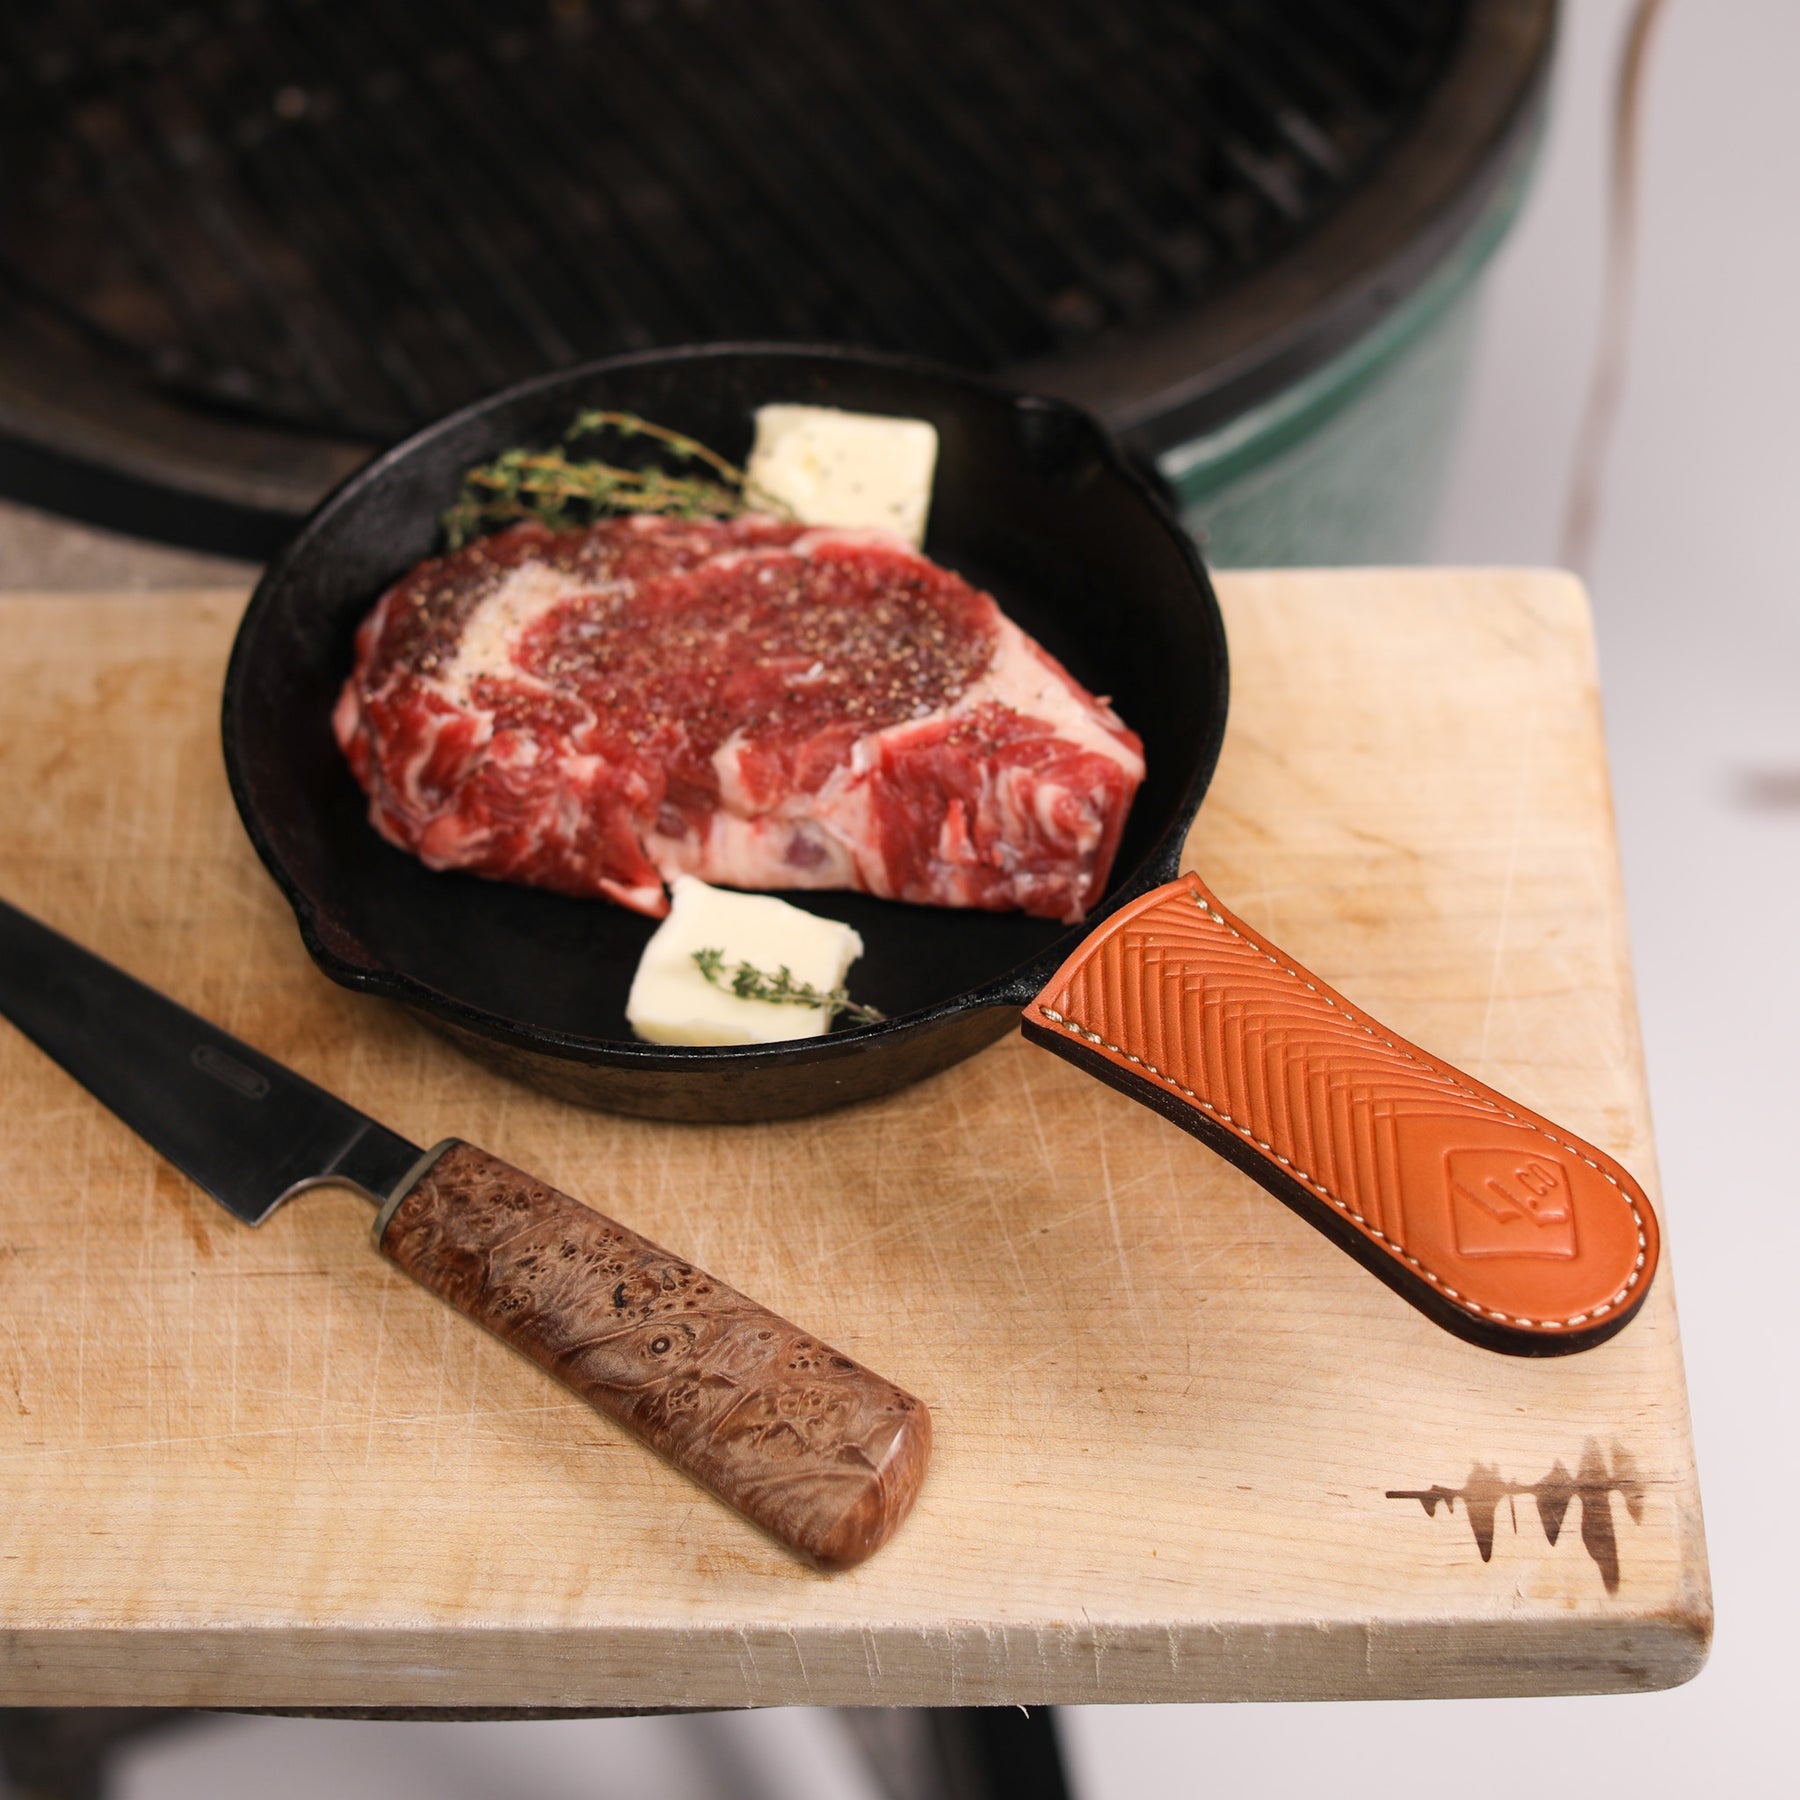 New product alert! Handcrafted leather cast iron skillet handle